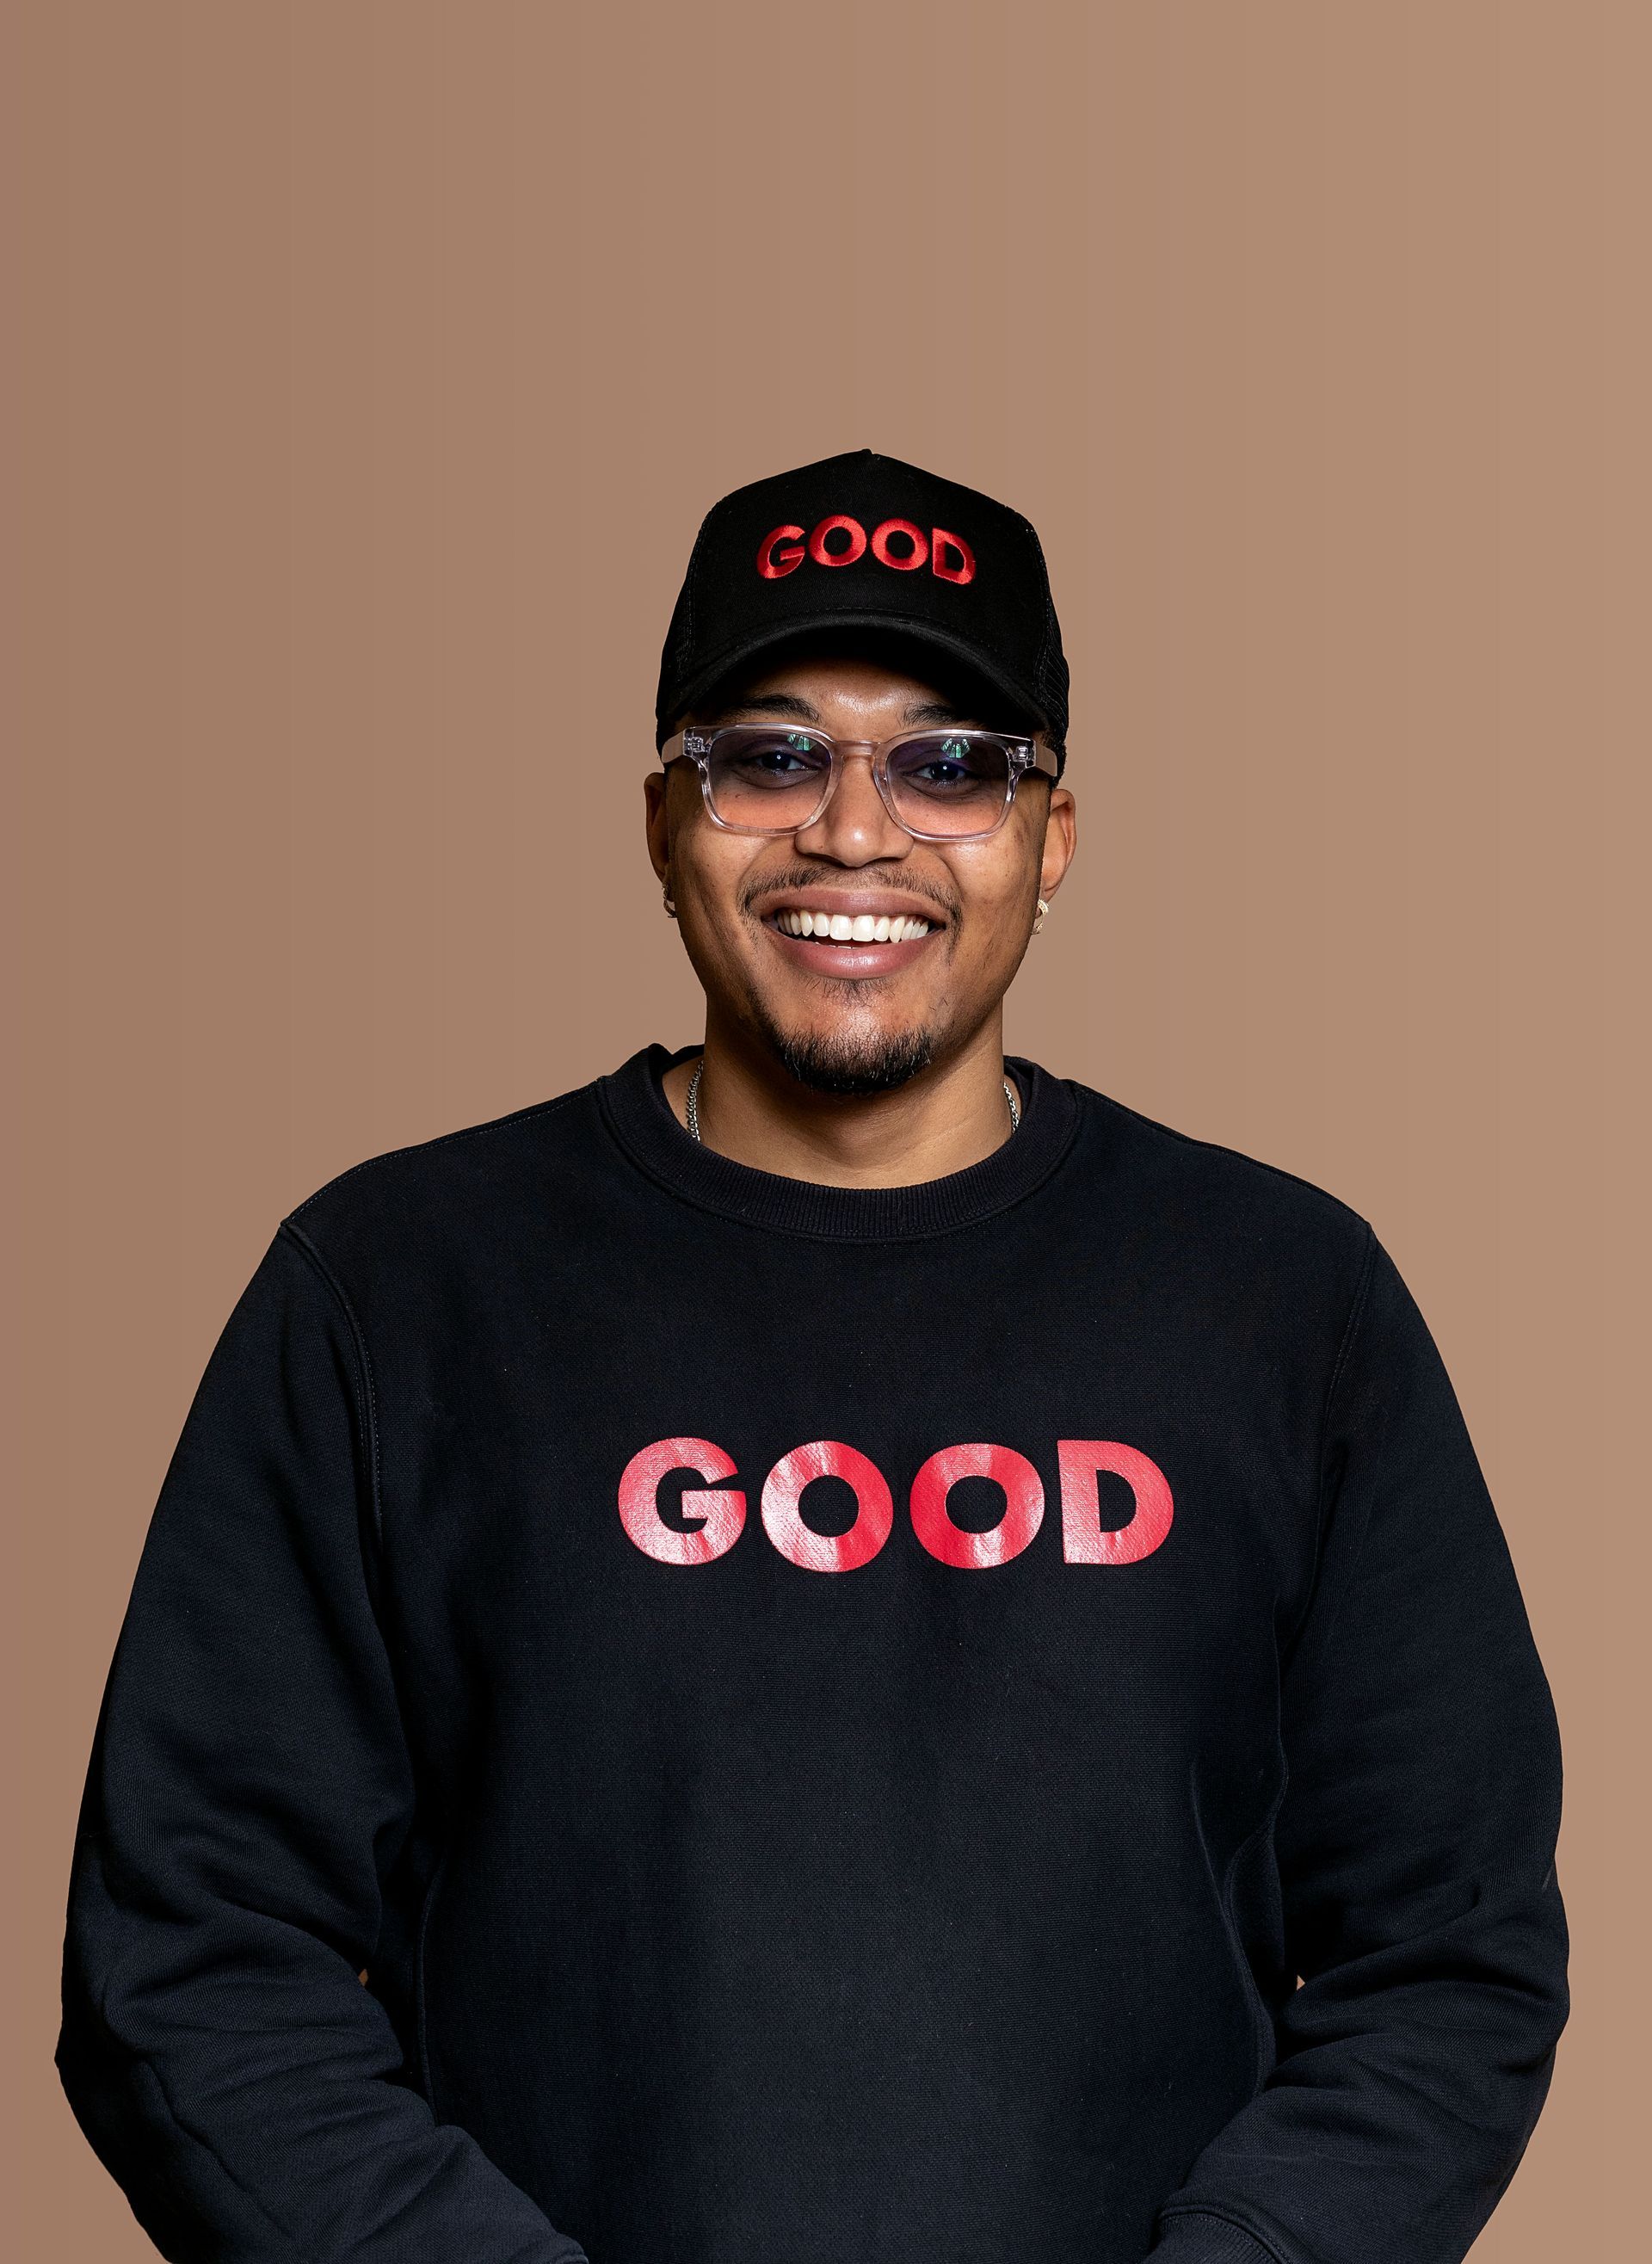 GOODProjects CEO Darius Baxter